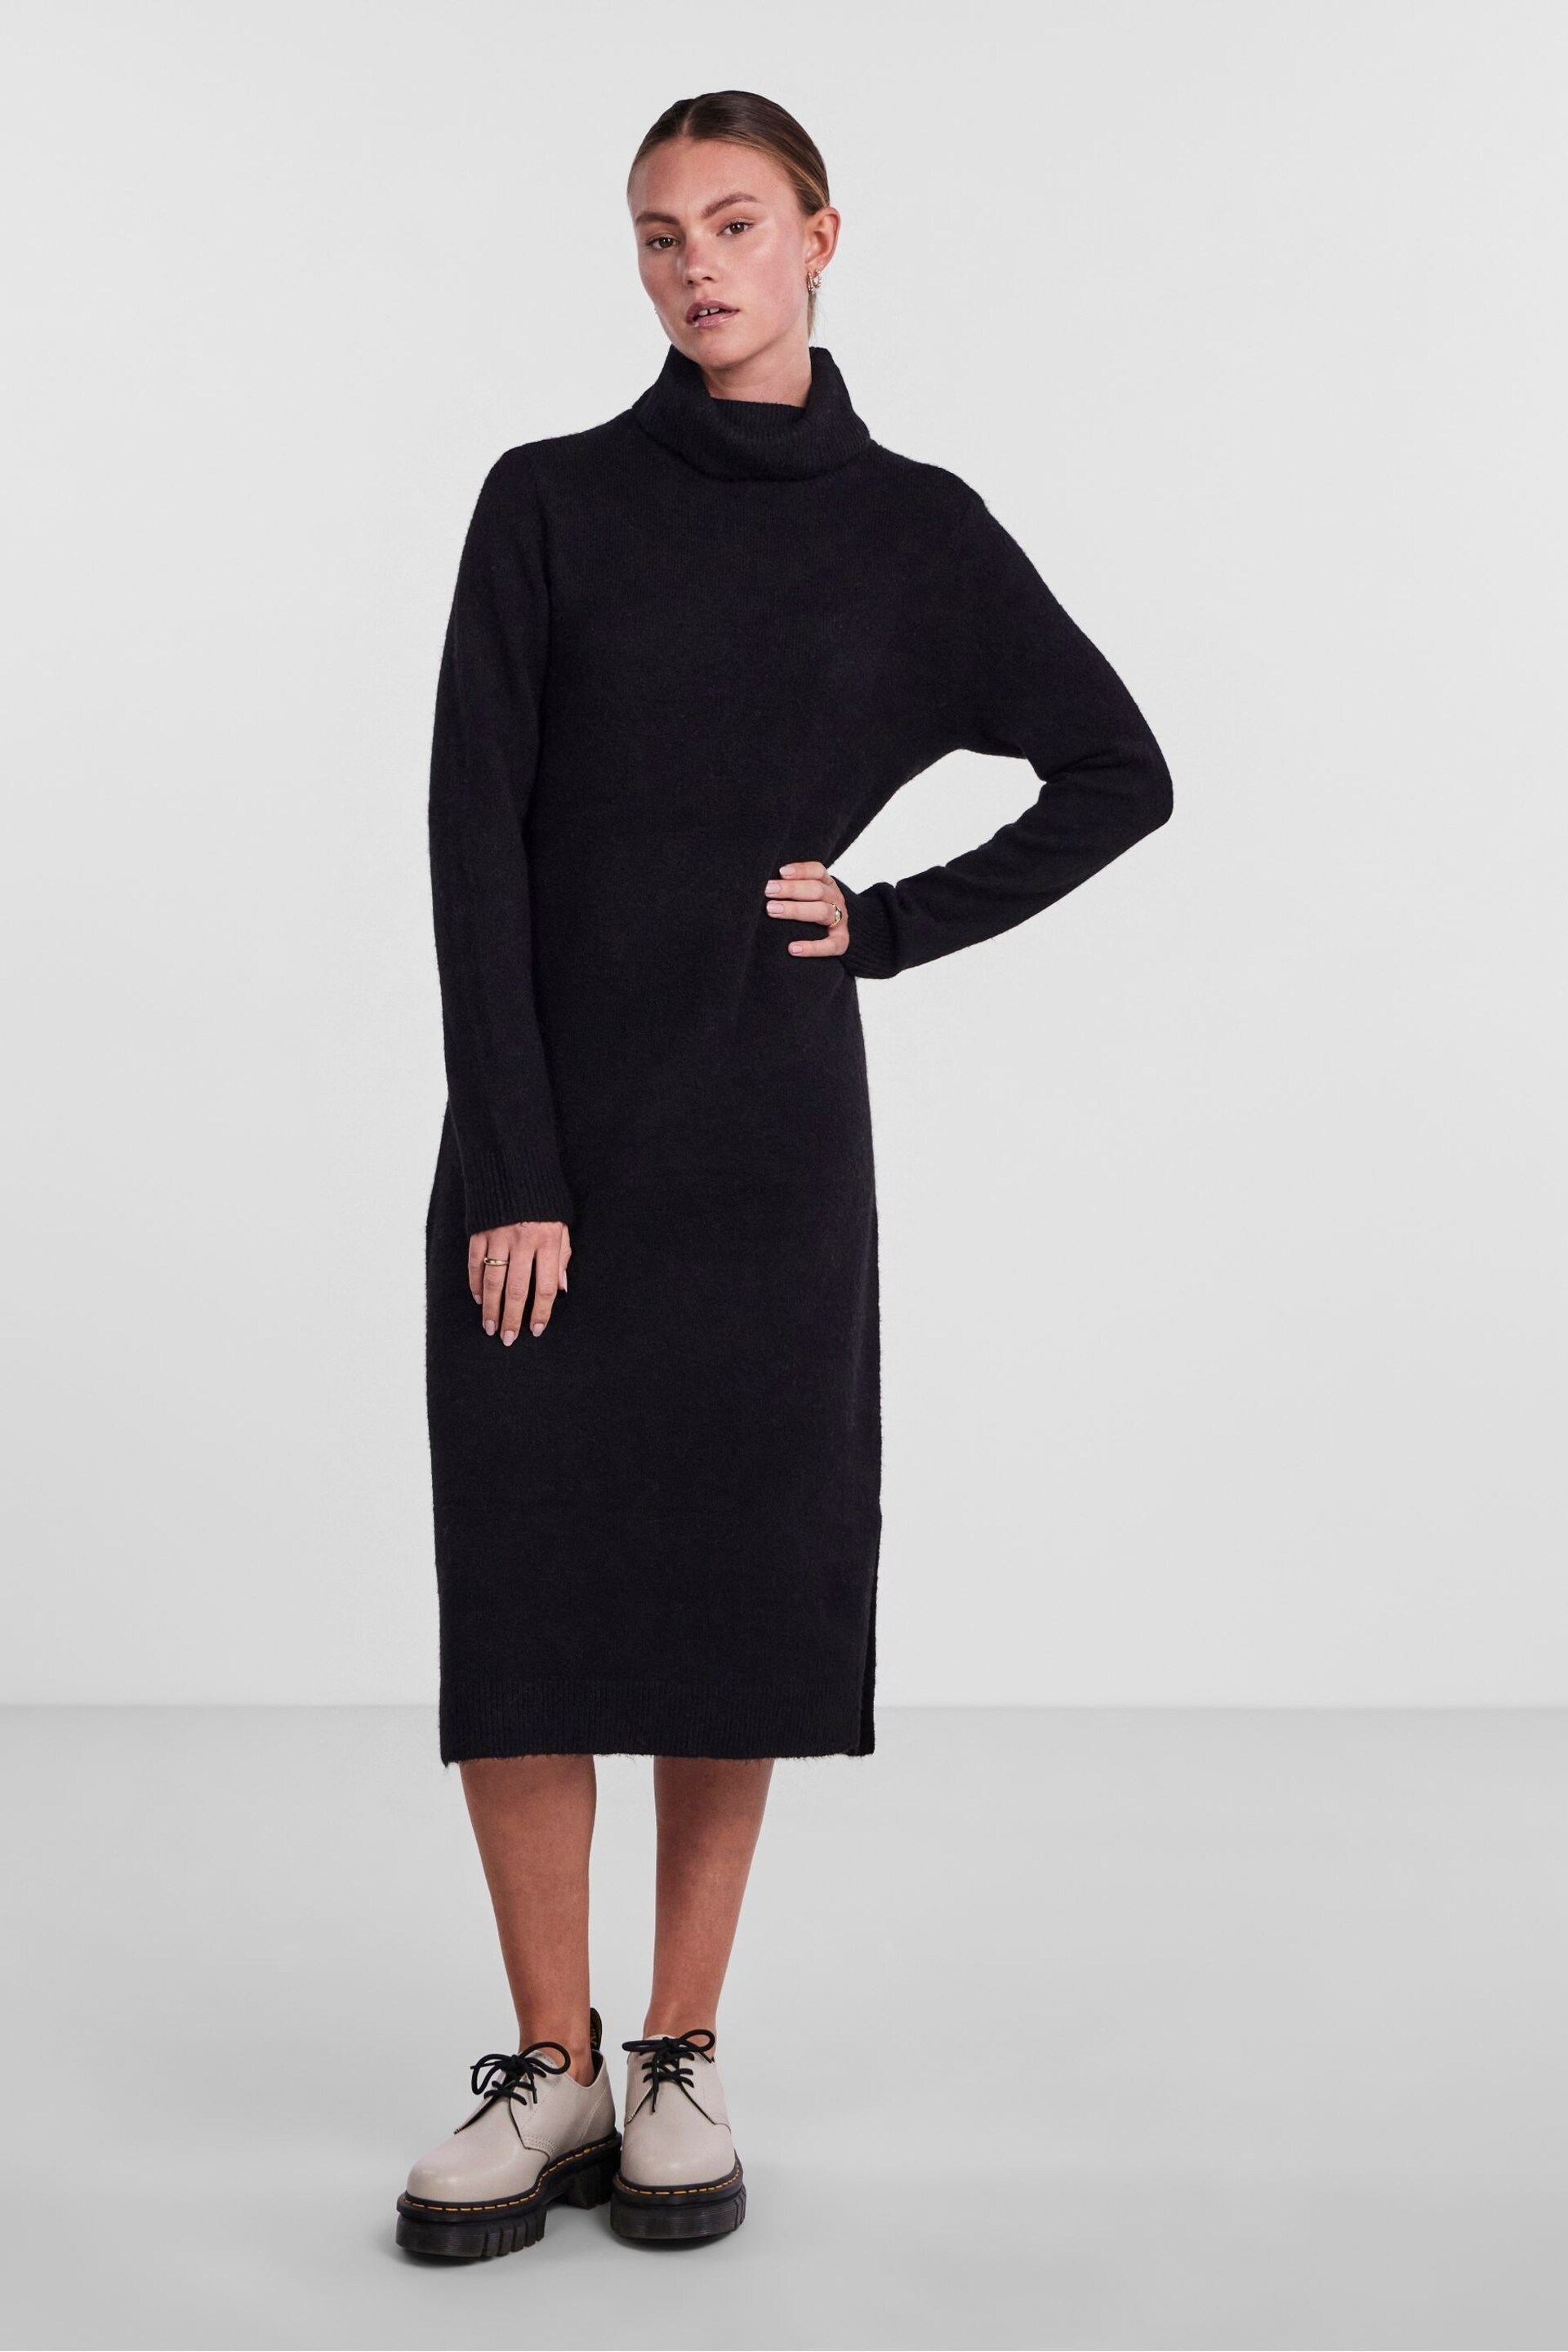 PIECES Black Roll Neck Knitted Midi Jumper Dress - Image 1 of 5